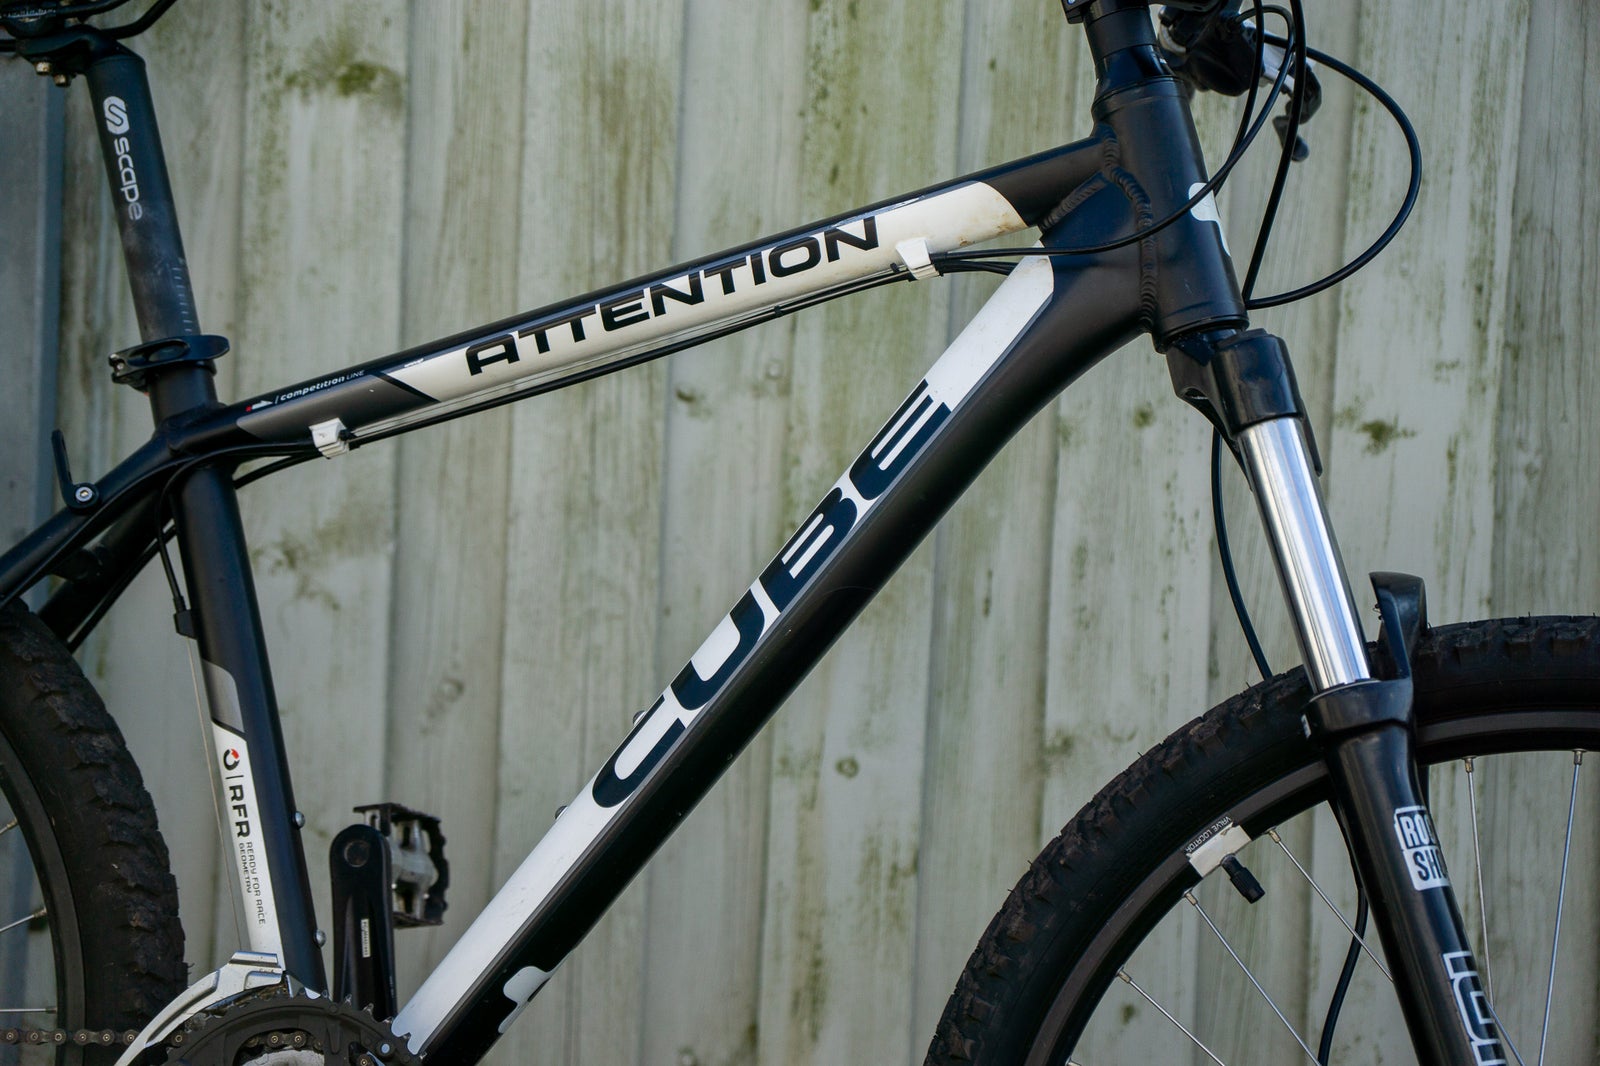 Cube Attention, hardtail, 18 tommer